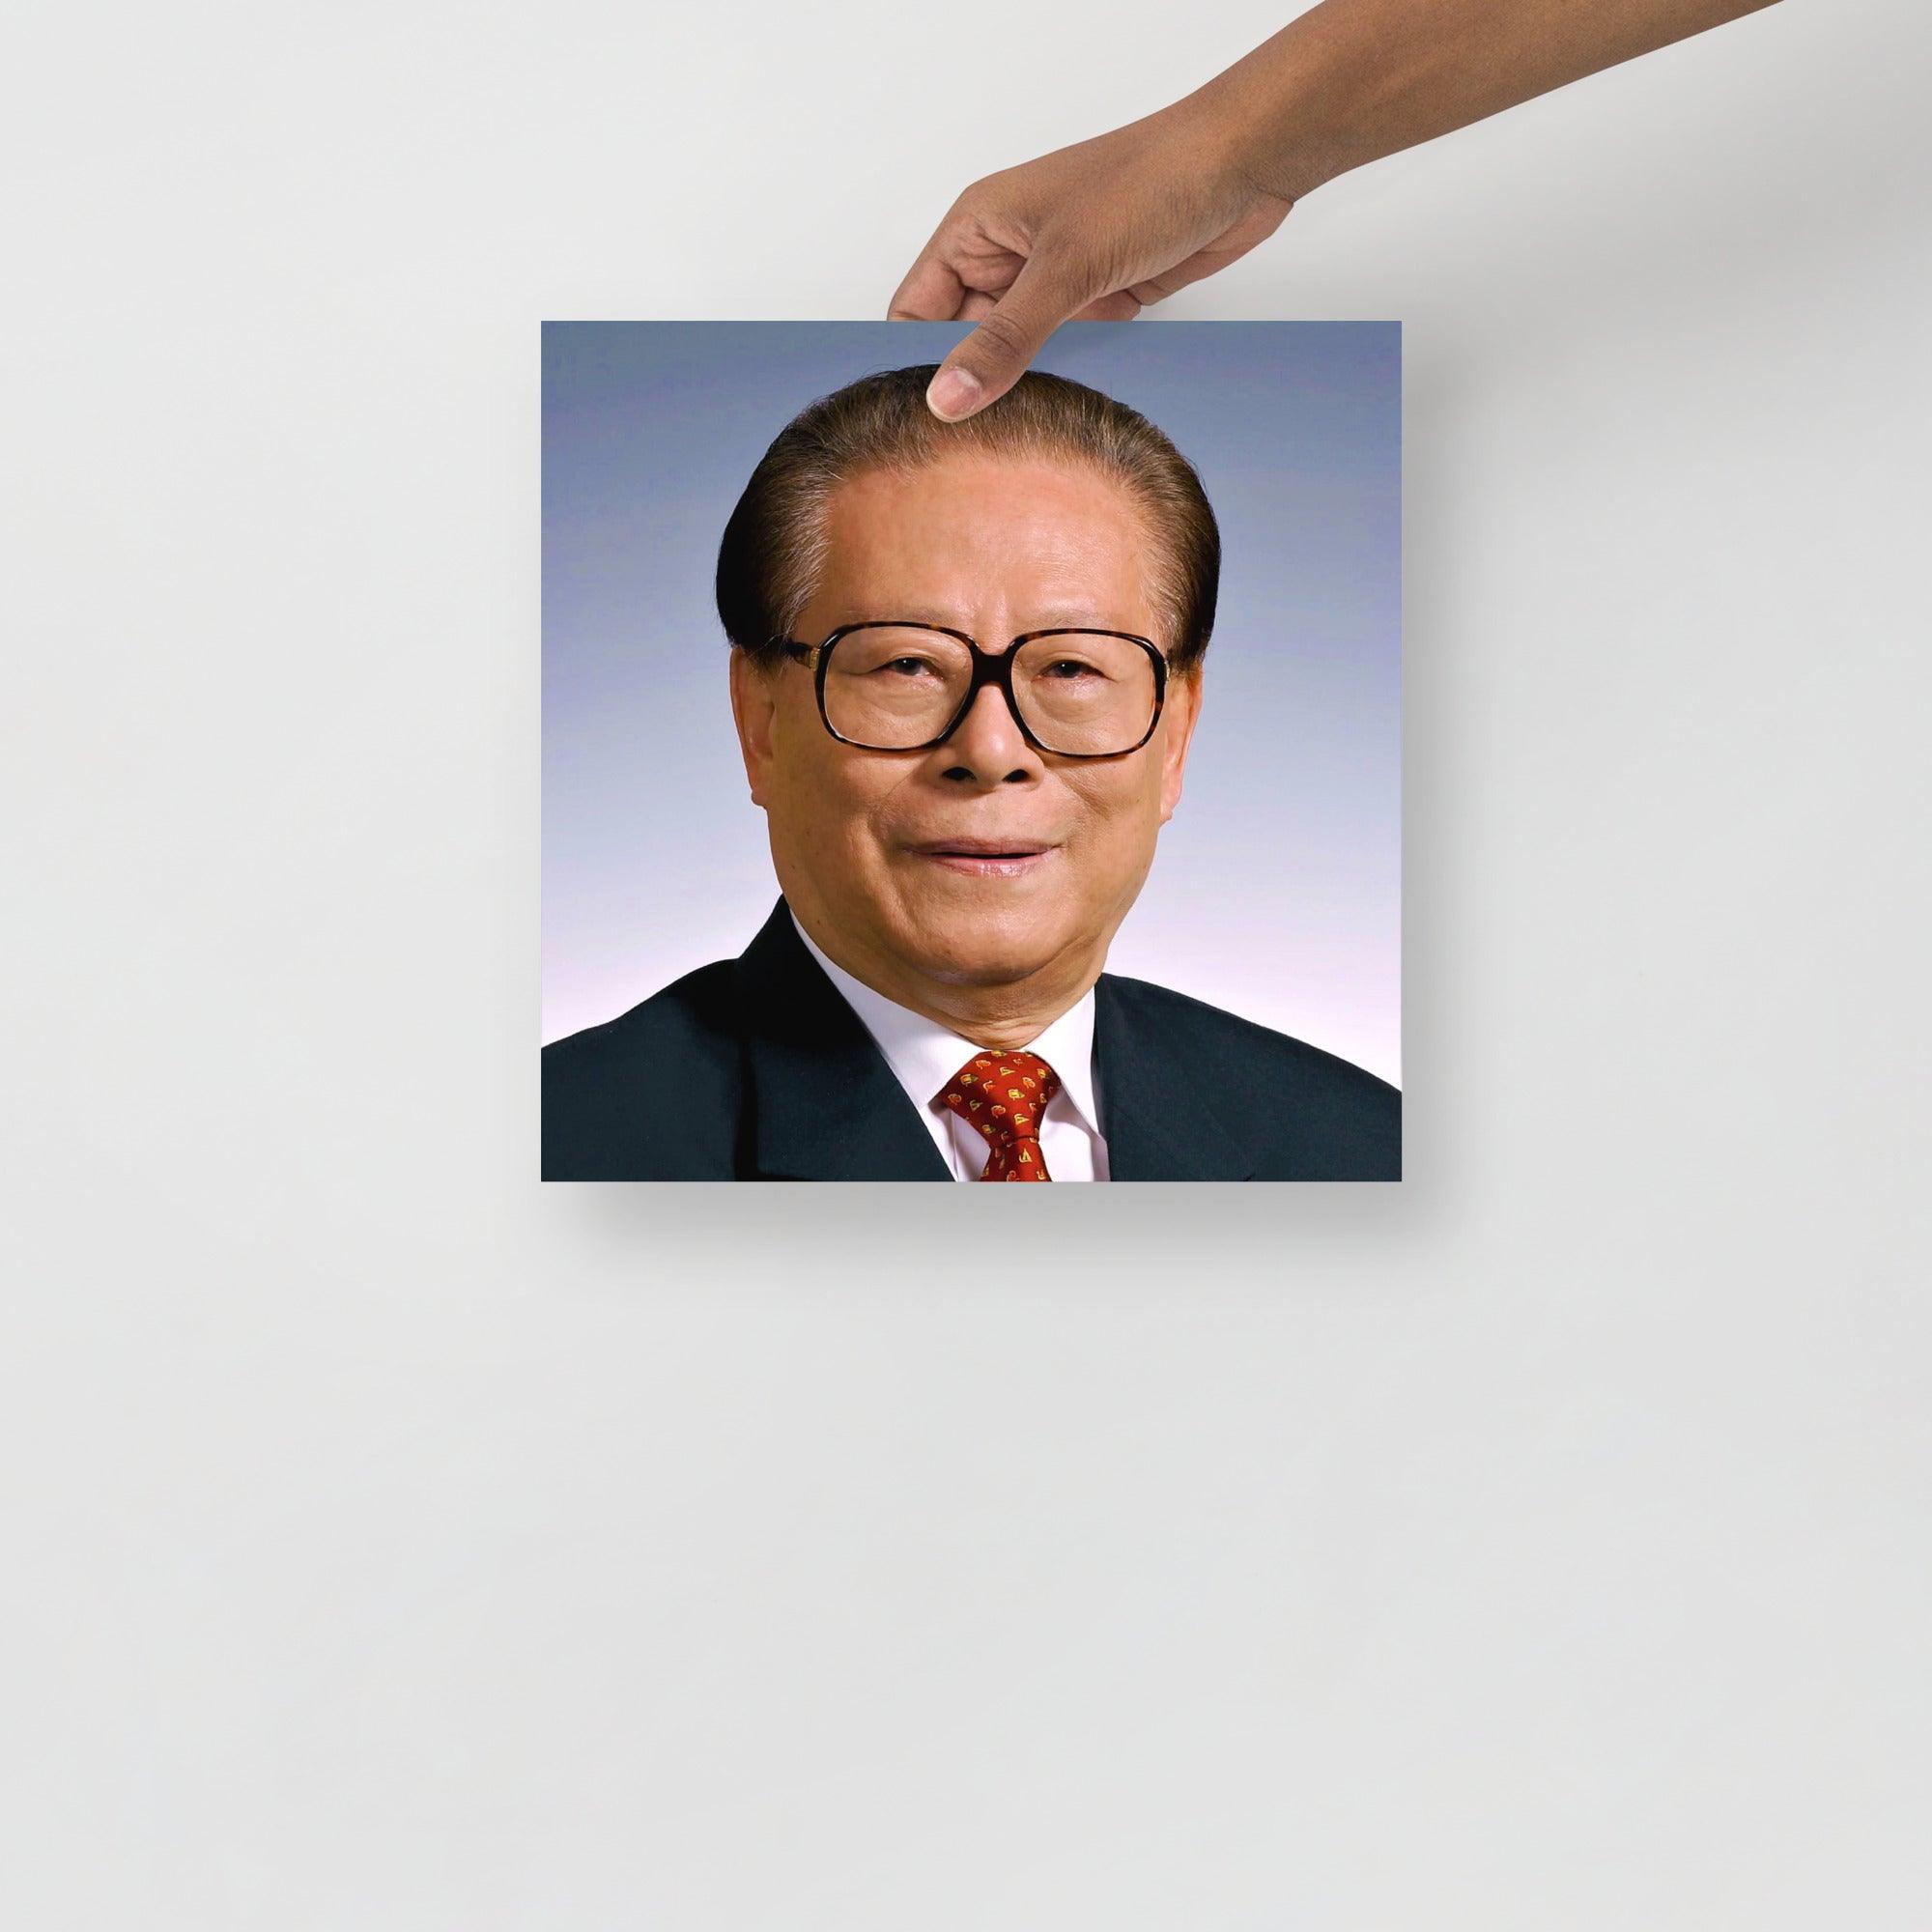 A Jiang Zemin Official Portrait poster on a plain backdrop in size 12x12”.